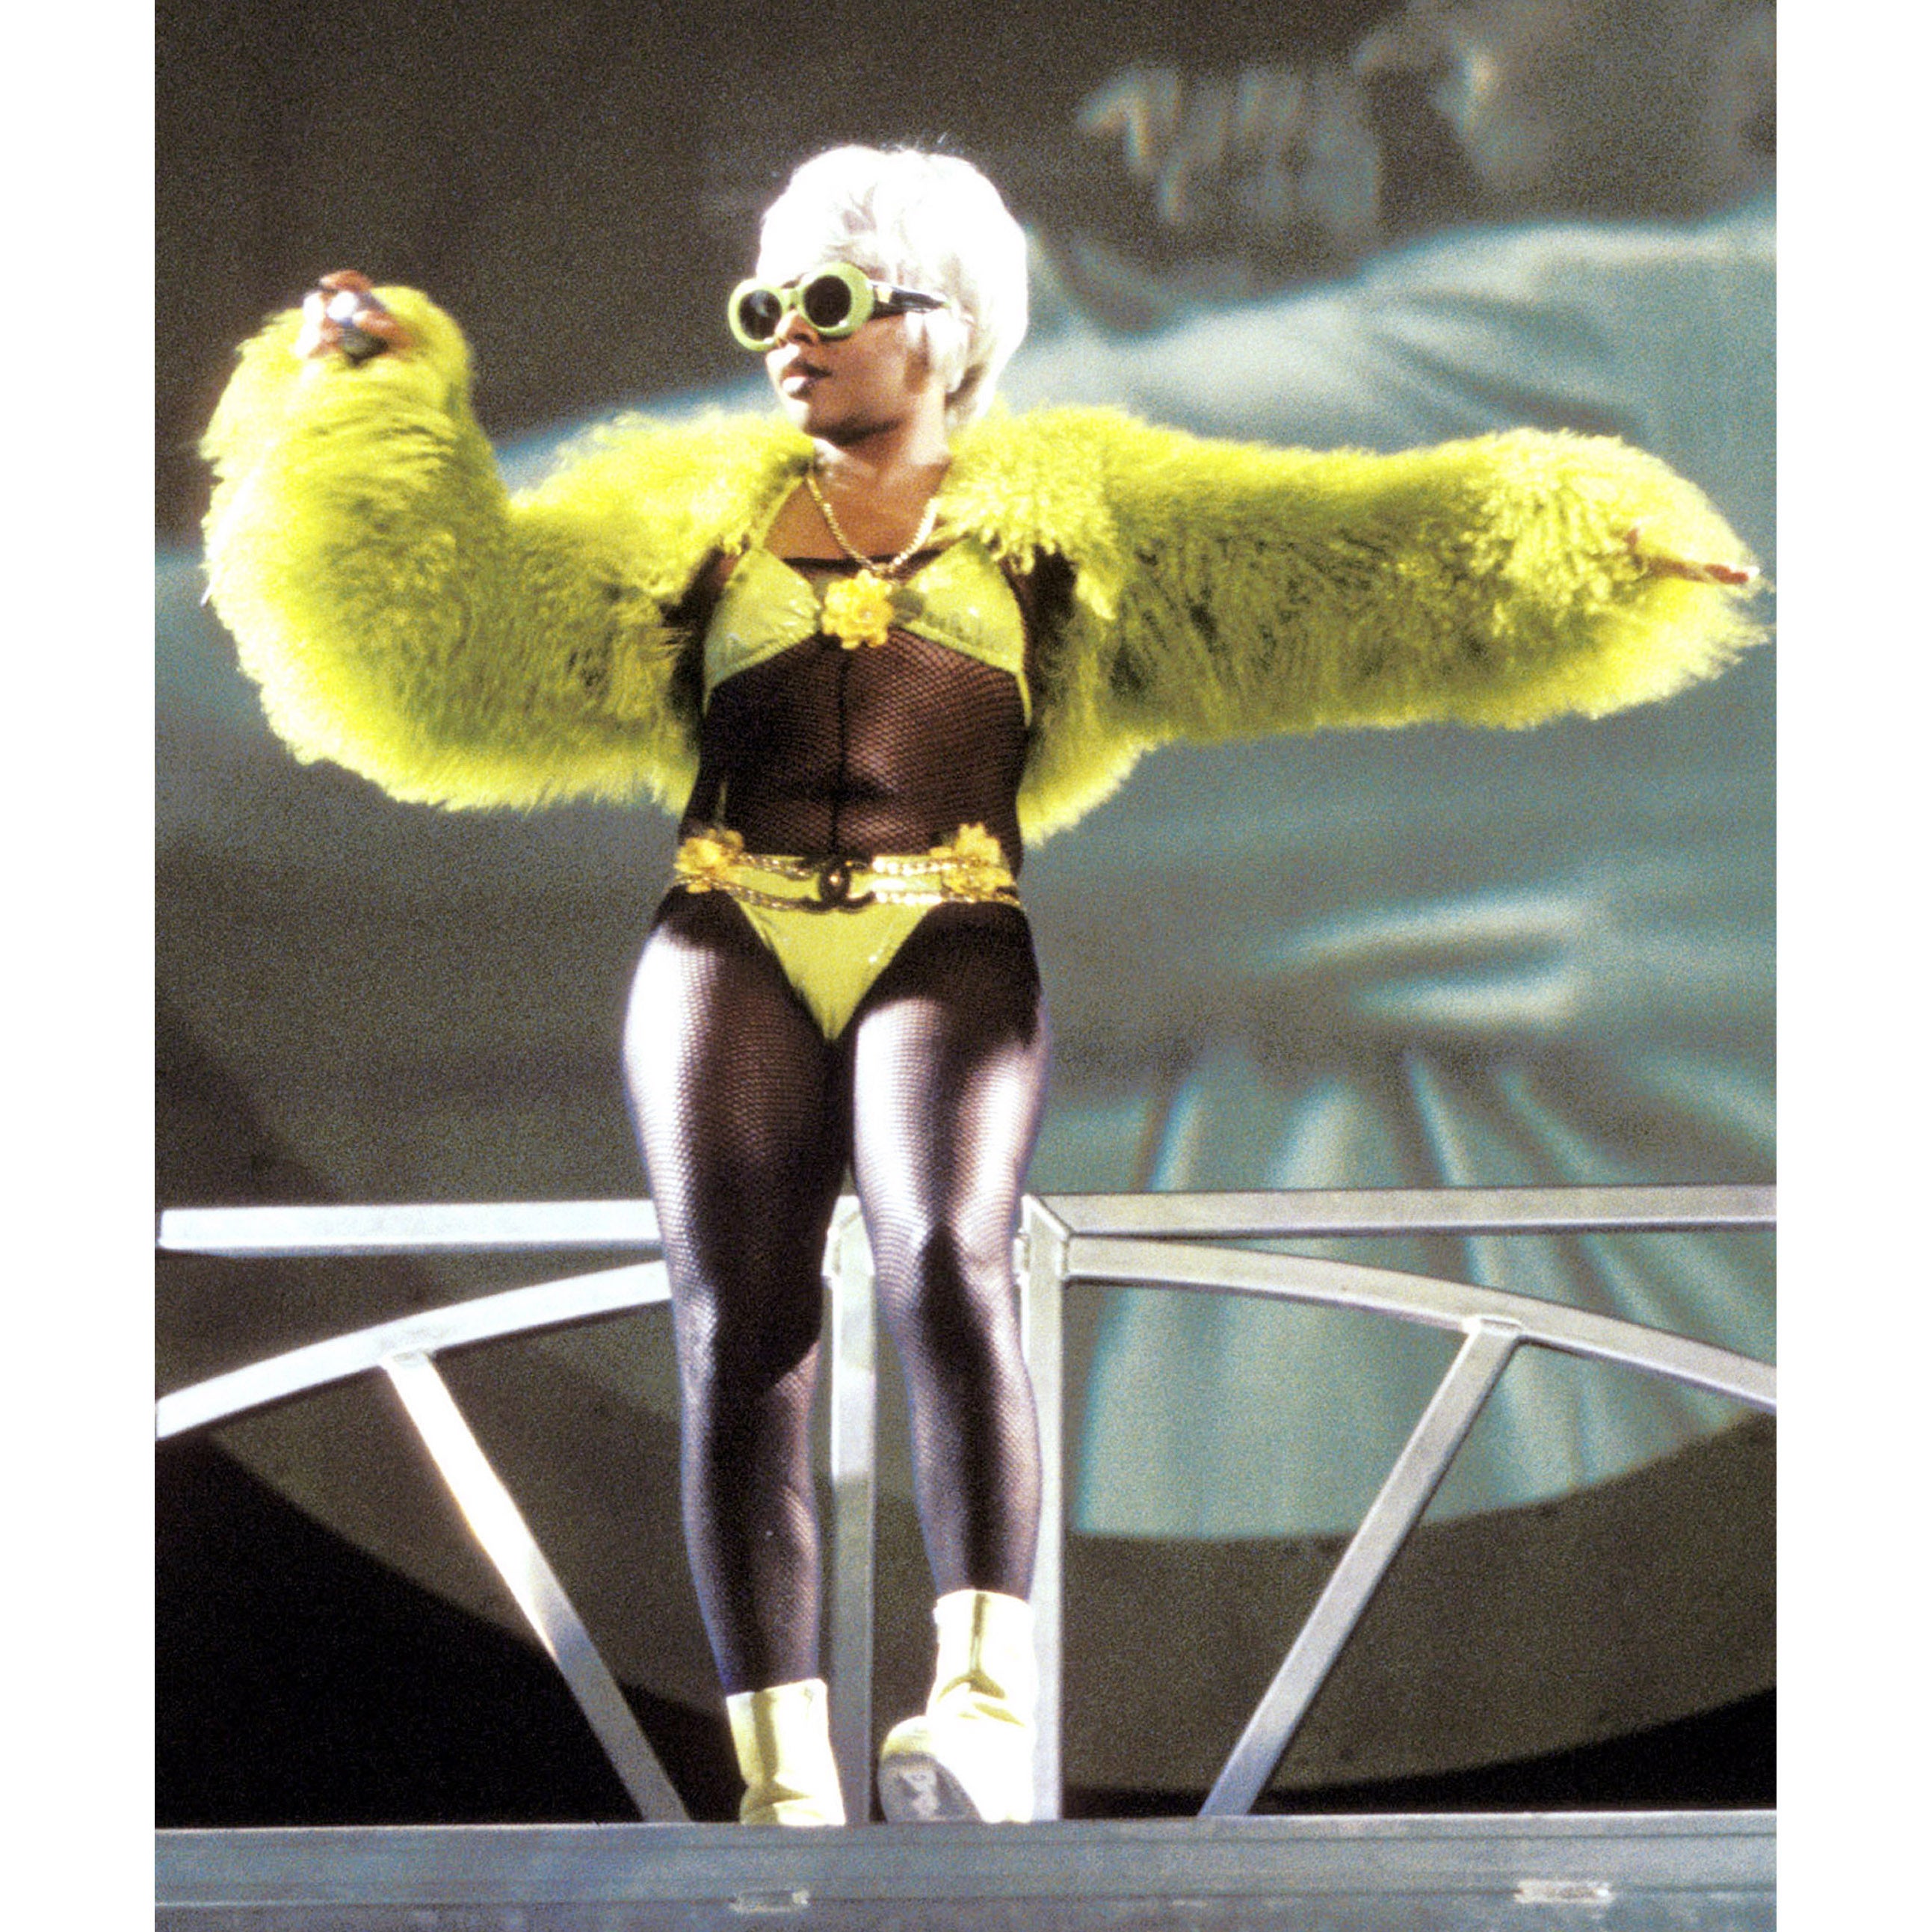 Lil' Kim's Most Outrageous, Show-Stopping Outfits
